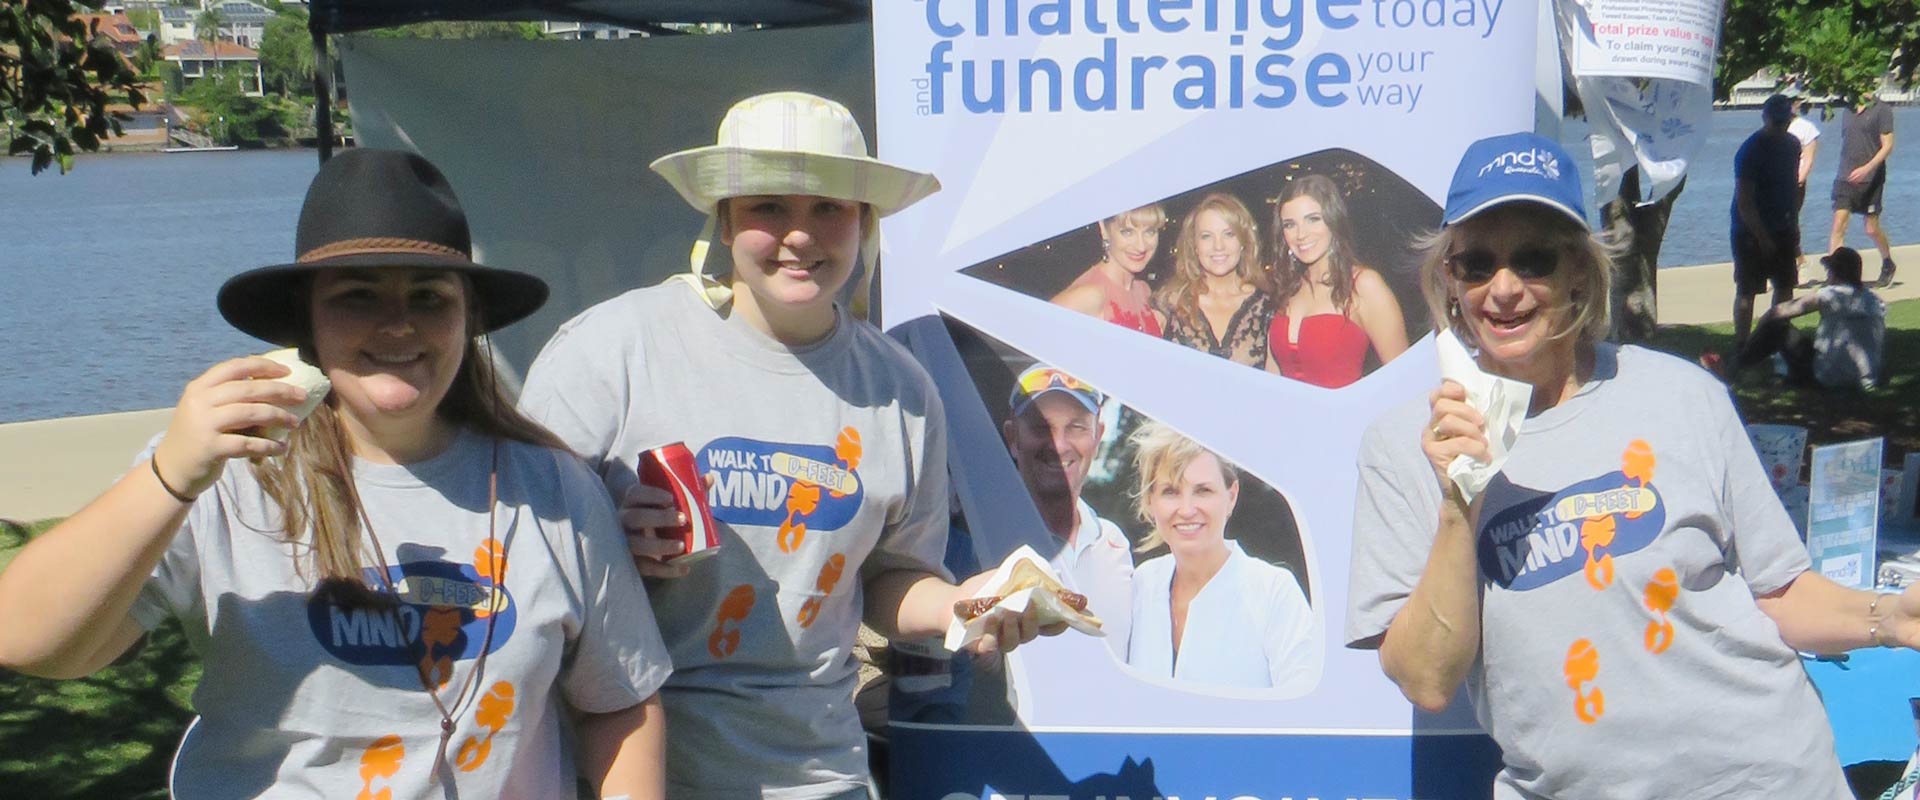 Get involved in MND fundraising. Donate, host your own event, ice bucket challenge, leave a bequest, or sponsor to help Motor Neurone Disease.